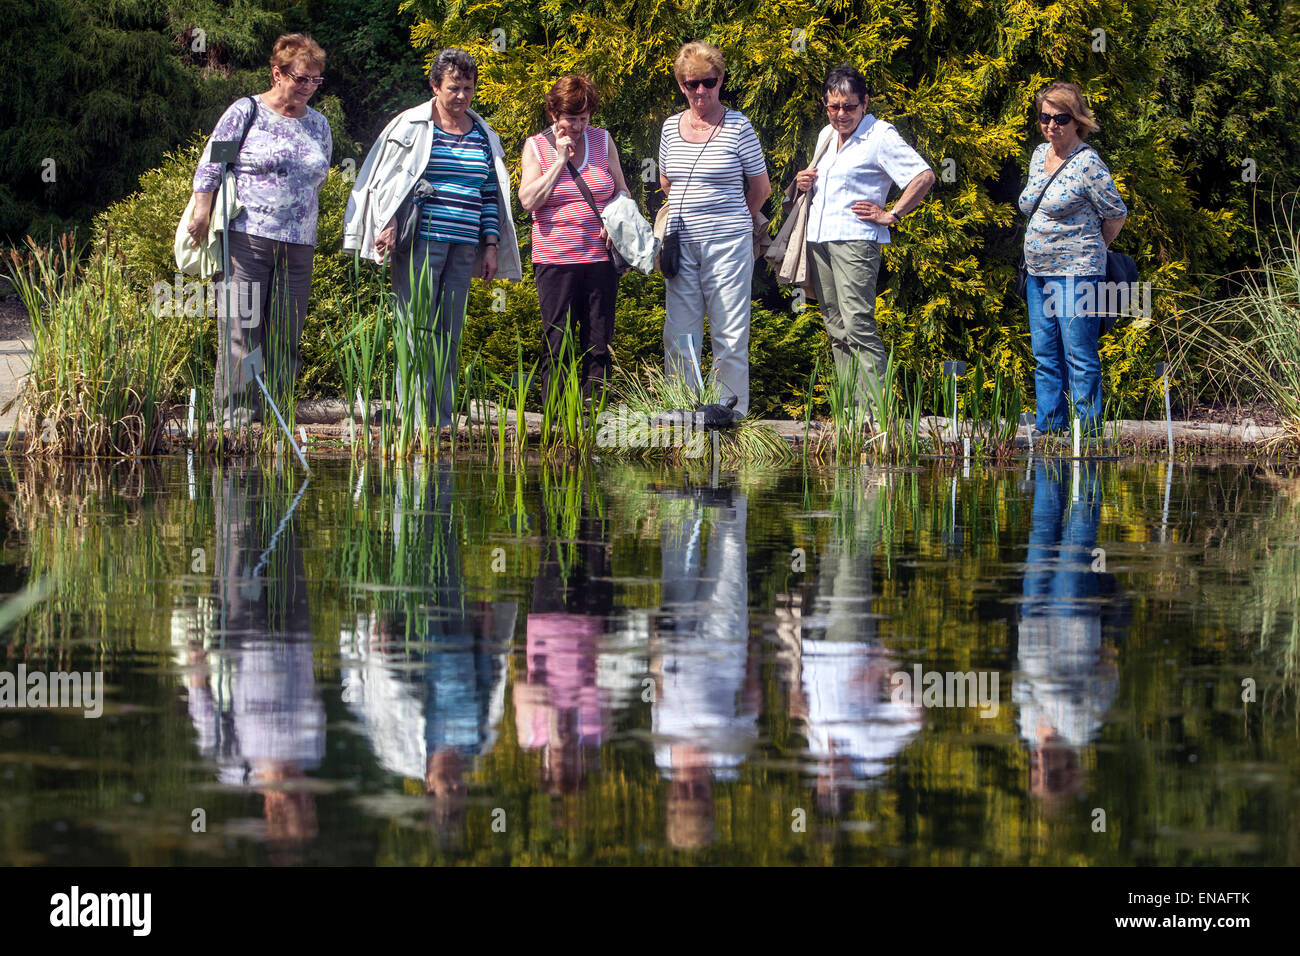 Six elderly women in the botanical garden, Troja, Prague Czech Republic Active pensioners are watching the water turtle, seniors group together Stock Photo